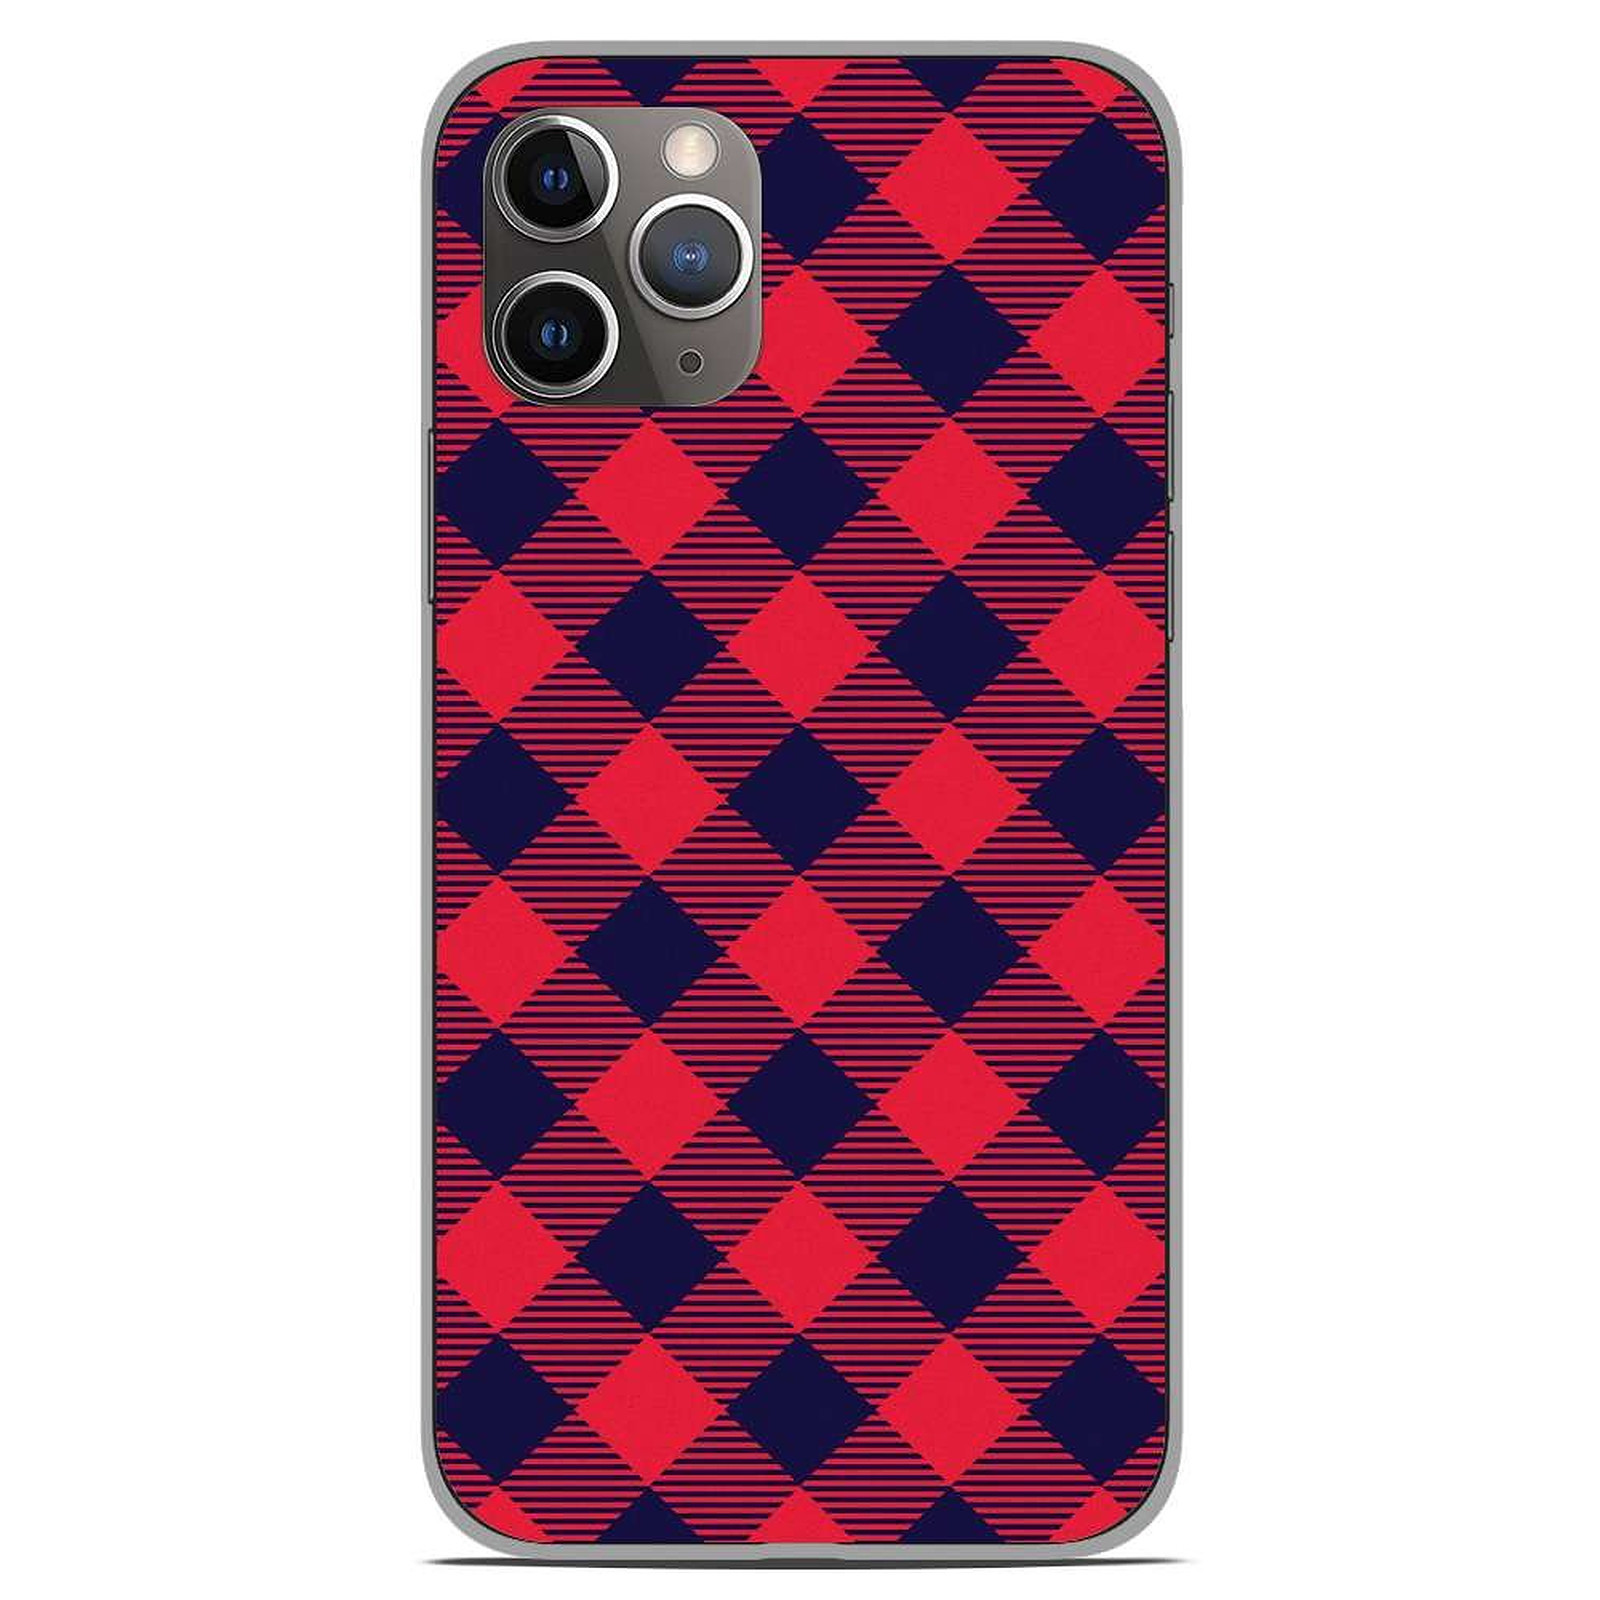 1001 Coques Coque silicone gel Apple iPhone 11 Pro motif Tartan Rouge - Coque telephone 1001Coques